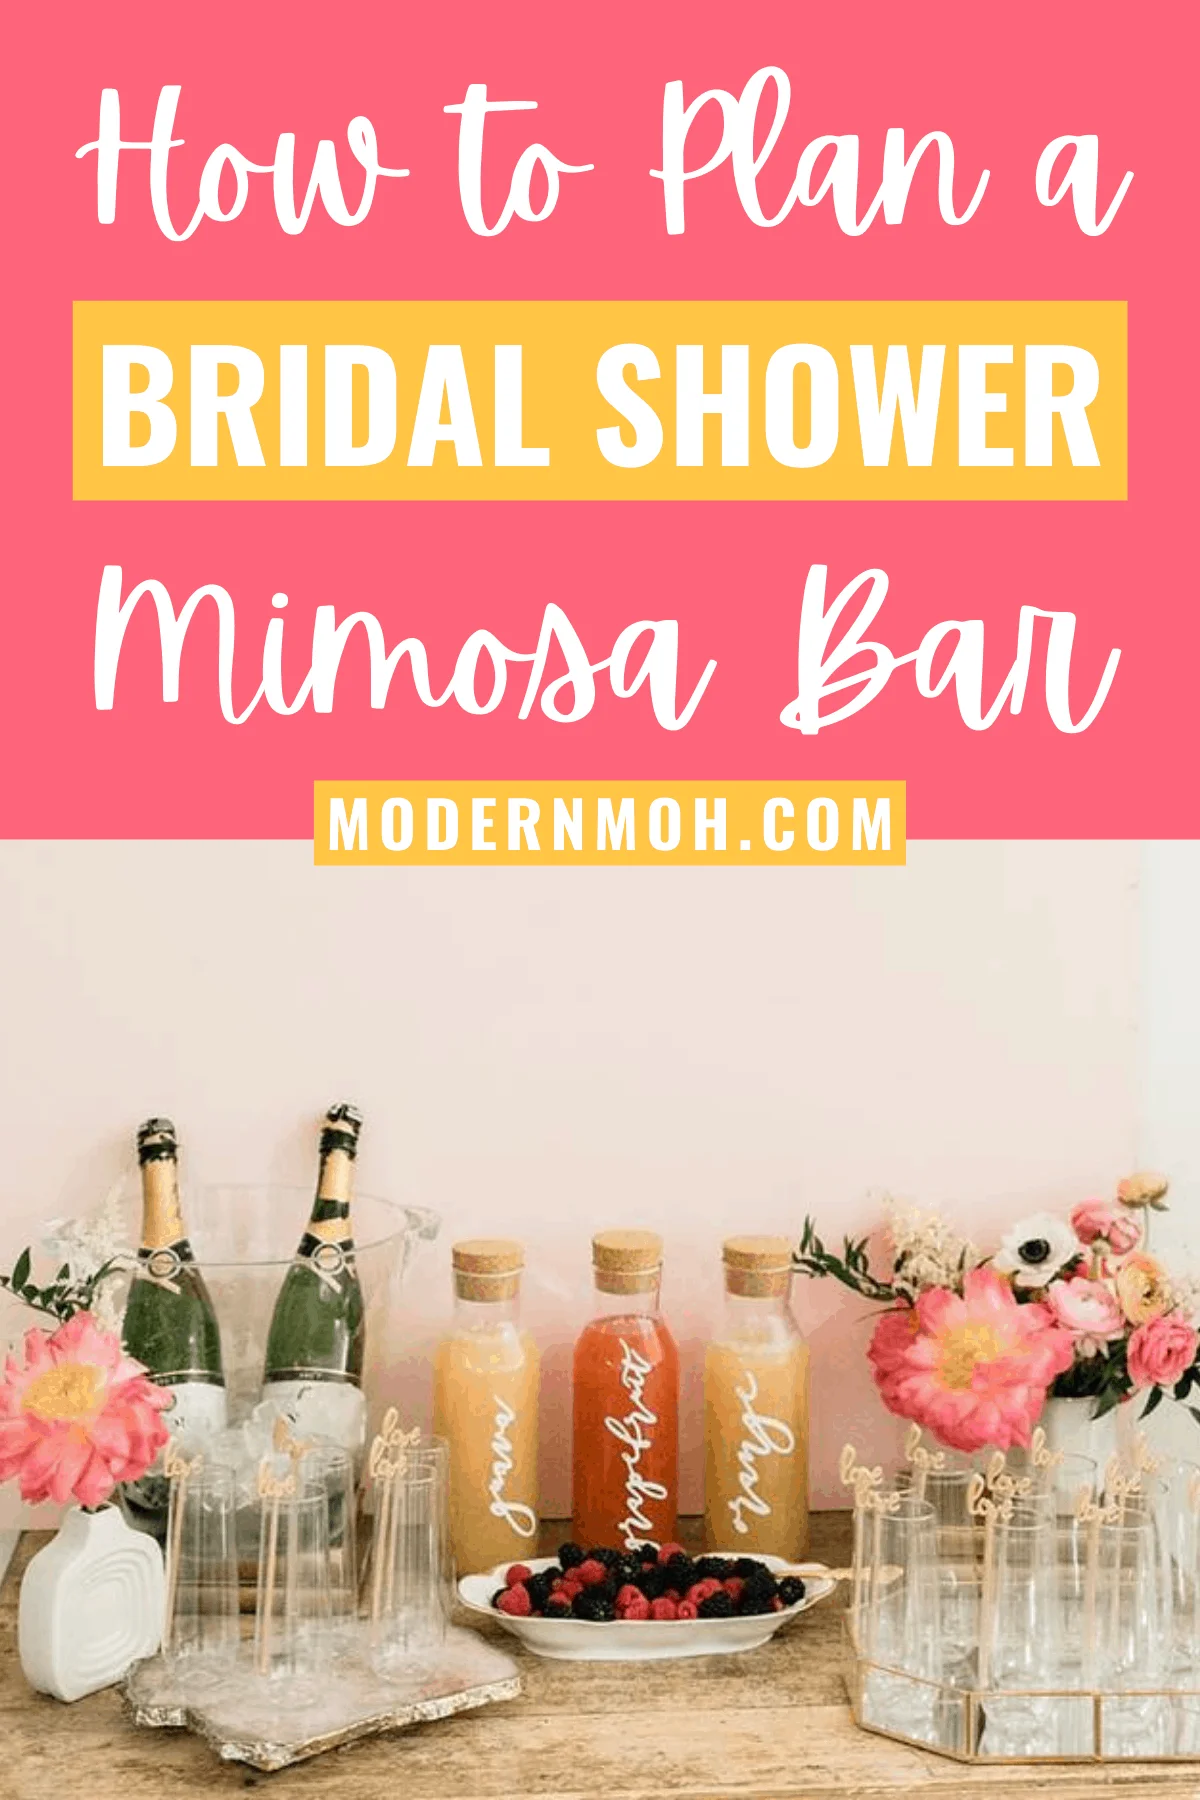 How to Plan a Mimosa Bar for a Bridal Shower